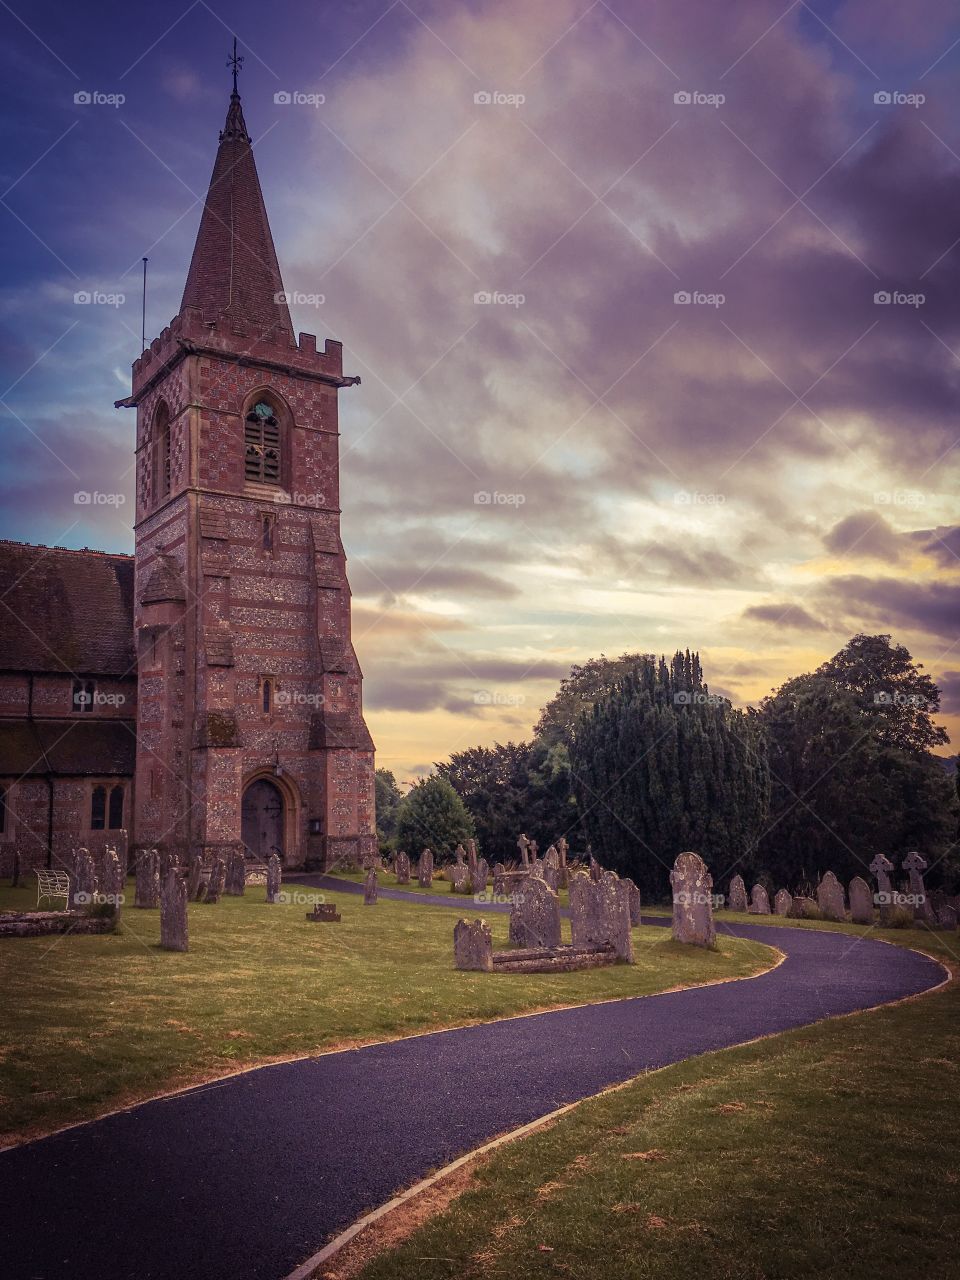 Local church at dusk in the Hampshire village of Twyford, England. 
